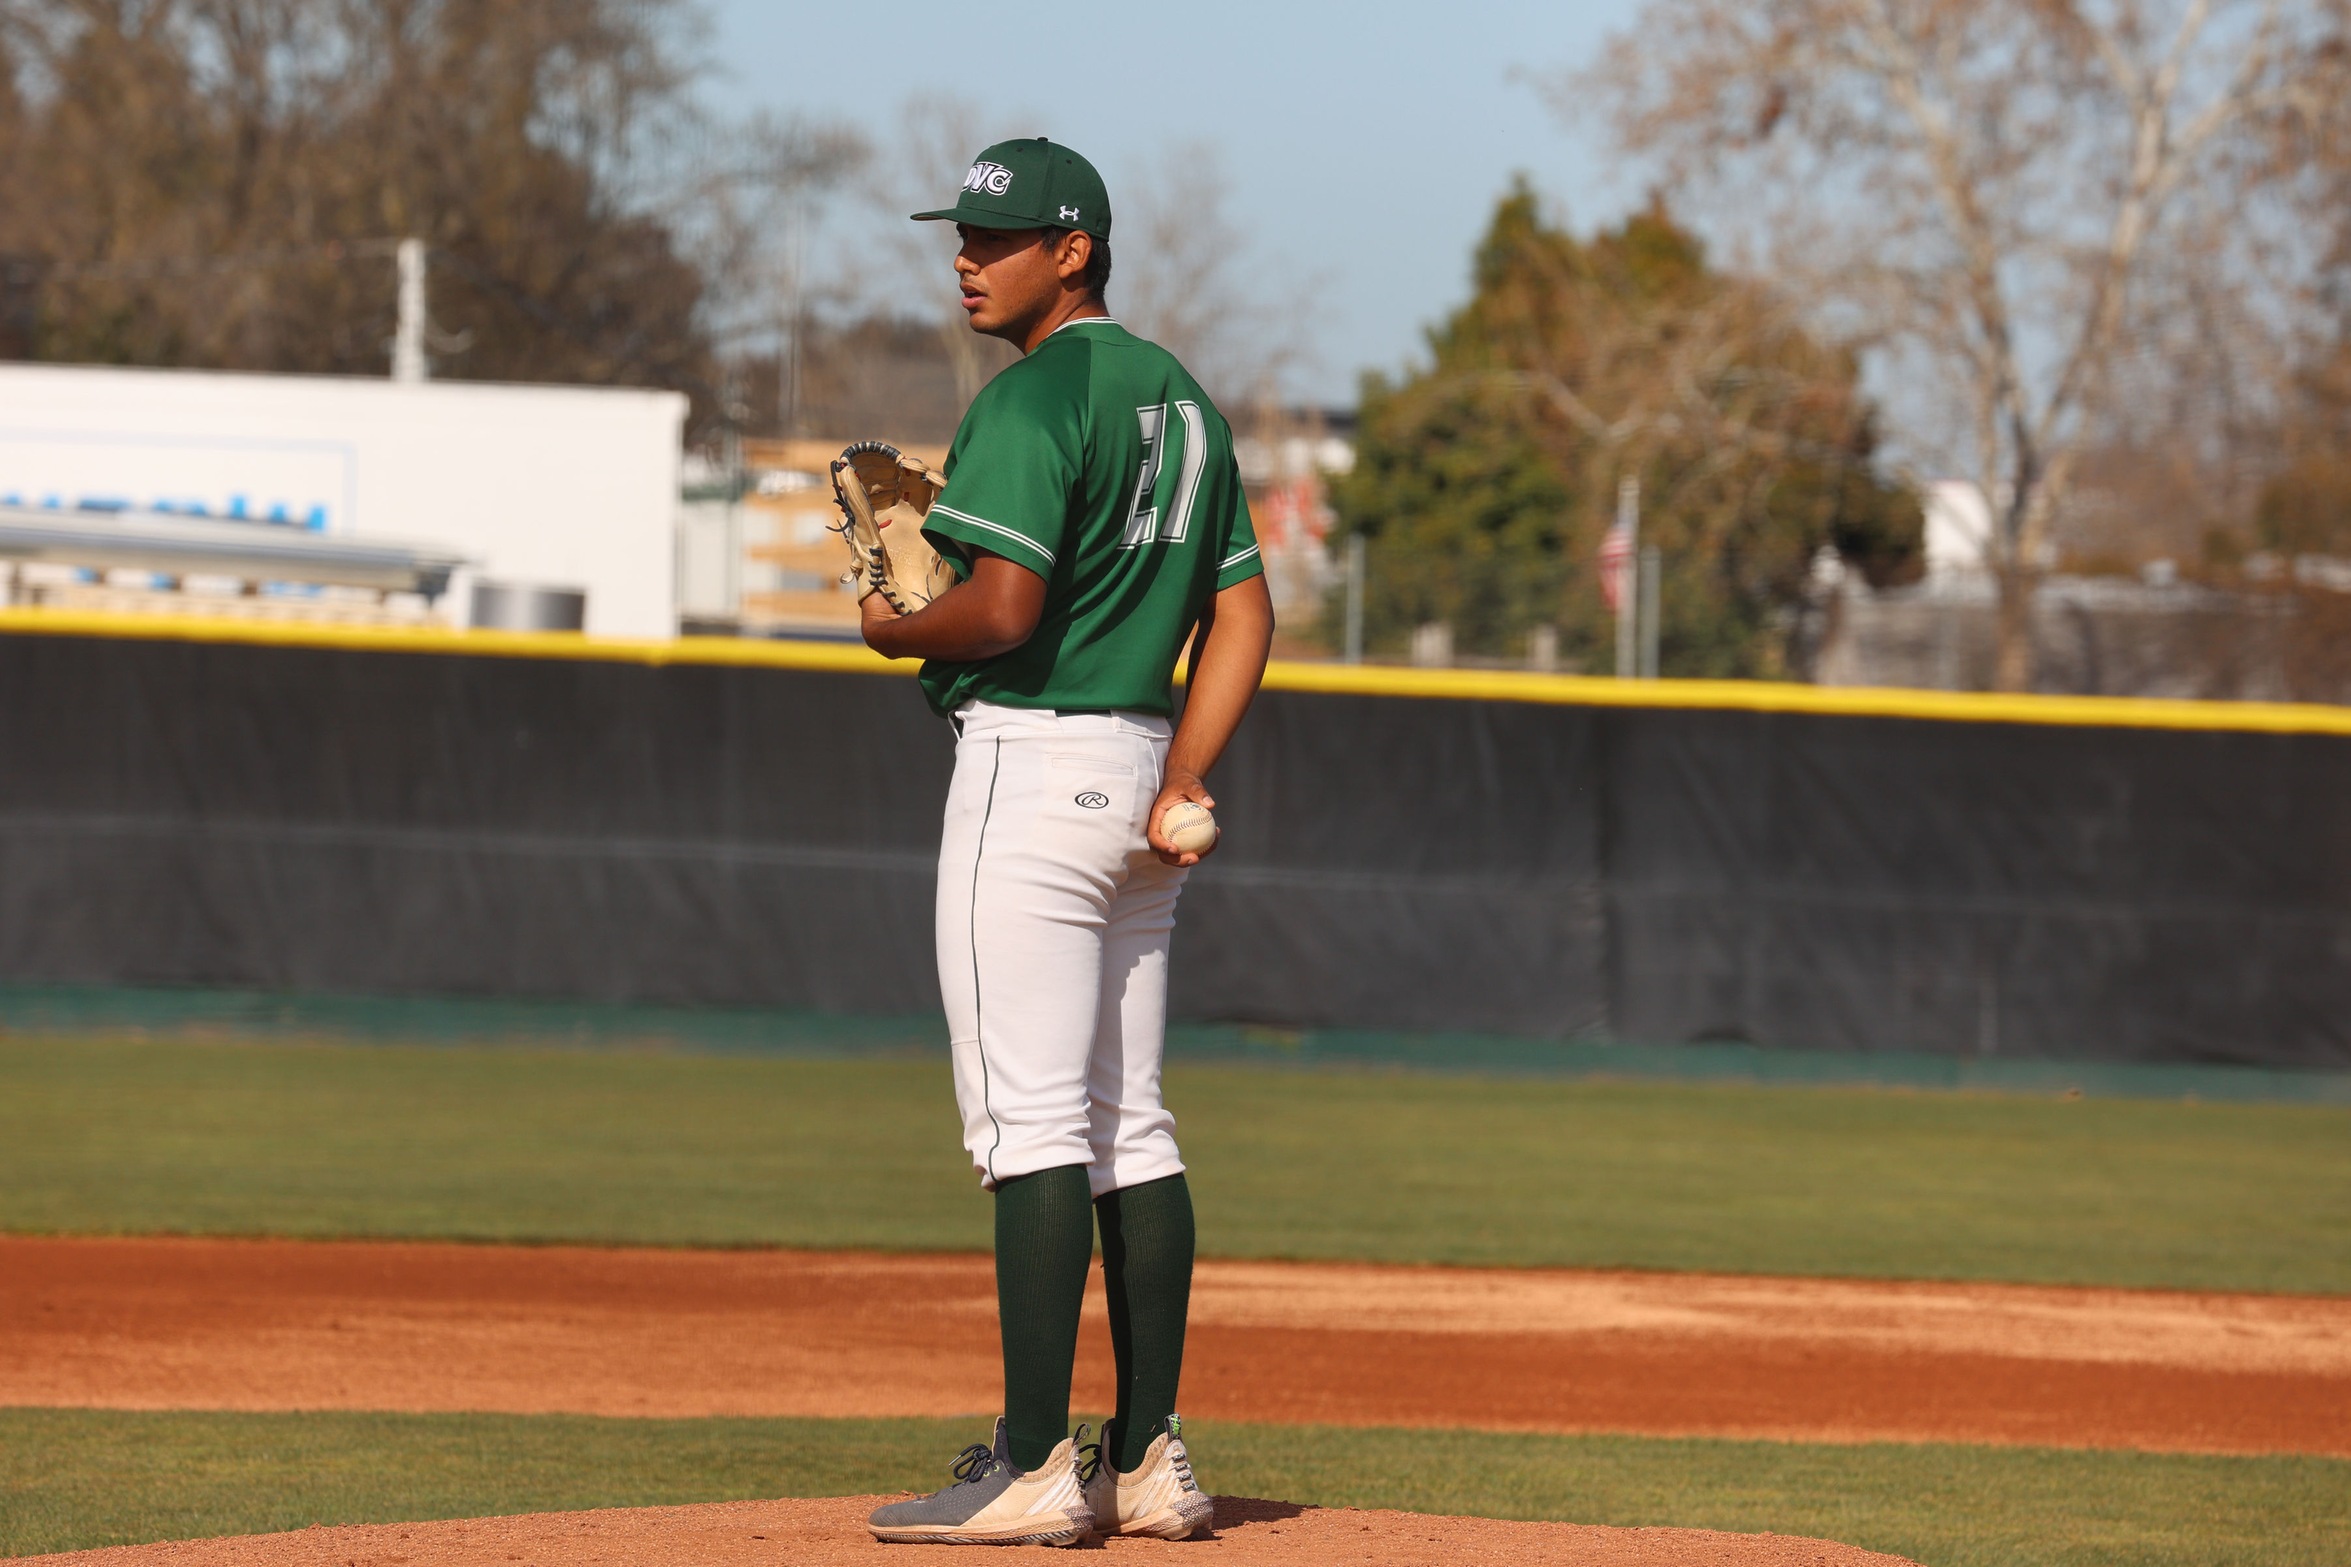 Baseball 3-3 in last 6 non-conference games, wins over Chabot, Hartnell, & CCSF